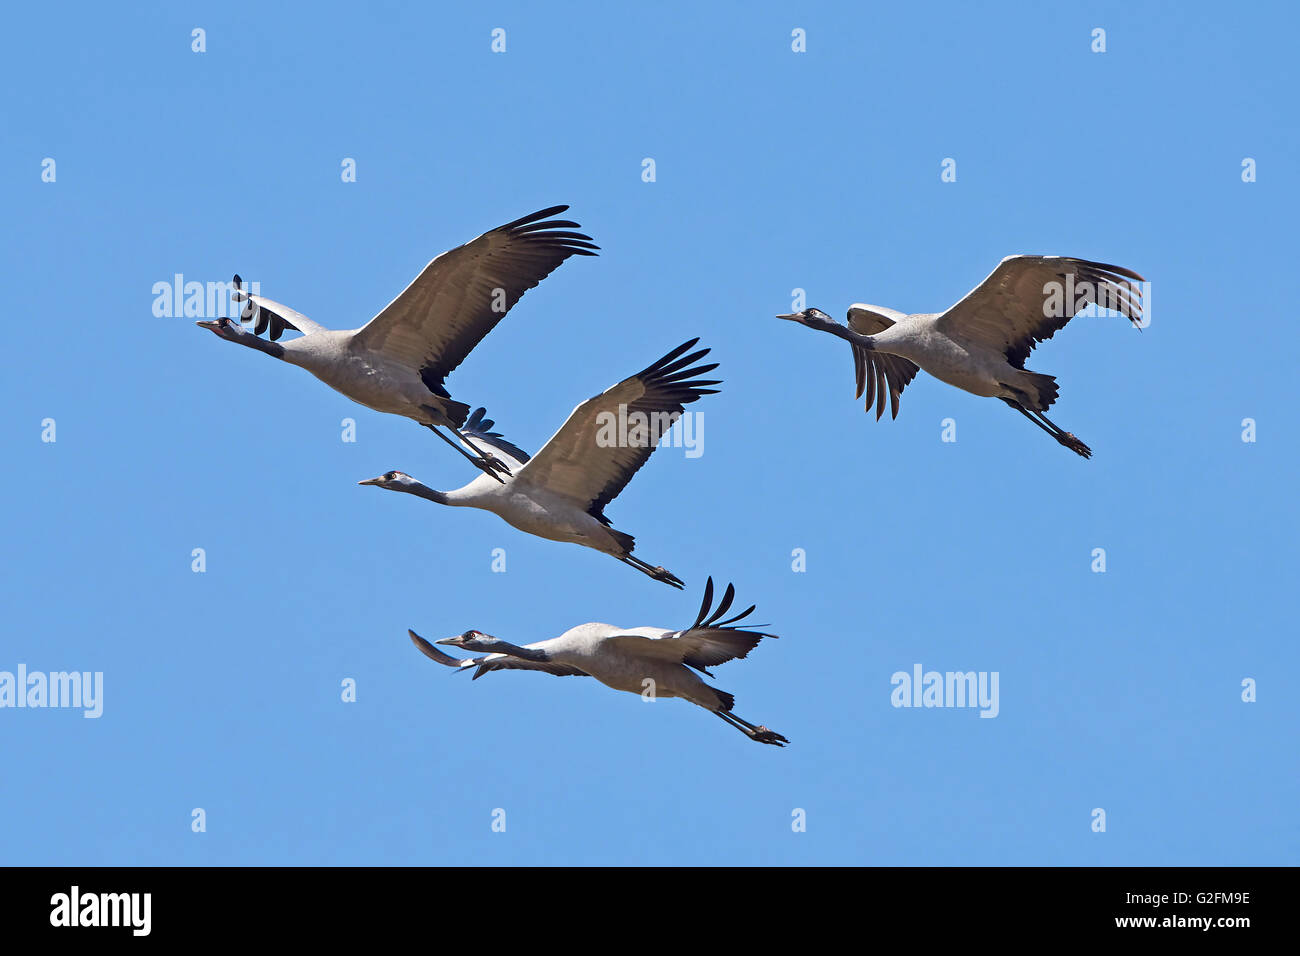 Common cranes in flight with blue skies in the background Stock Photo